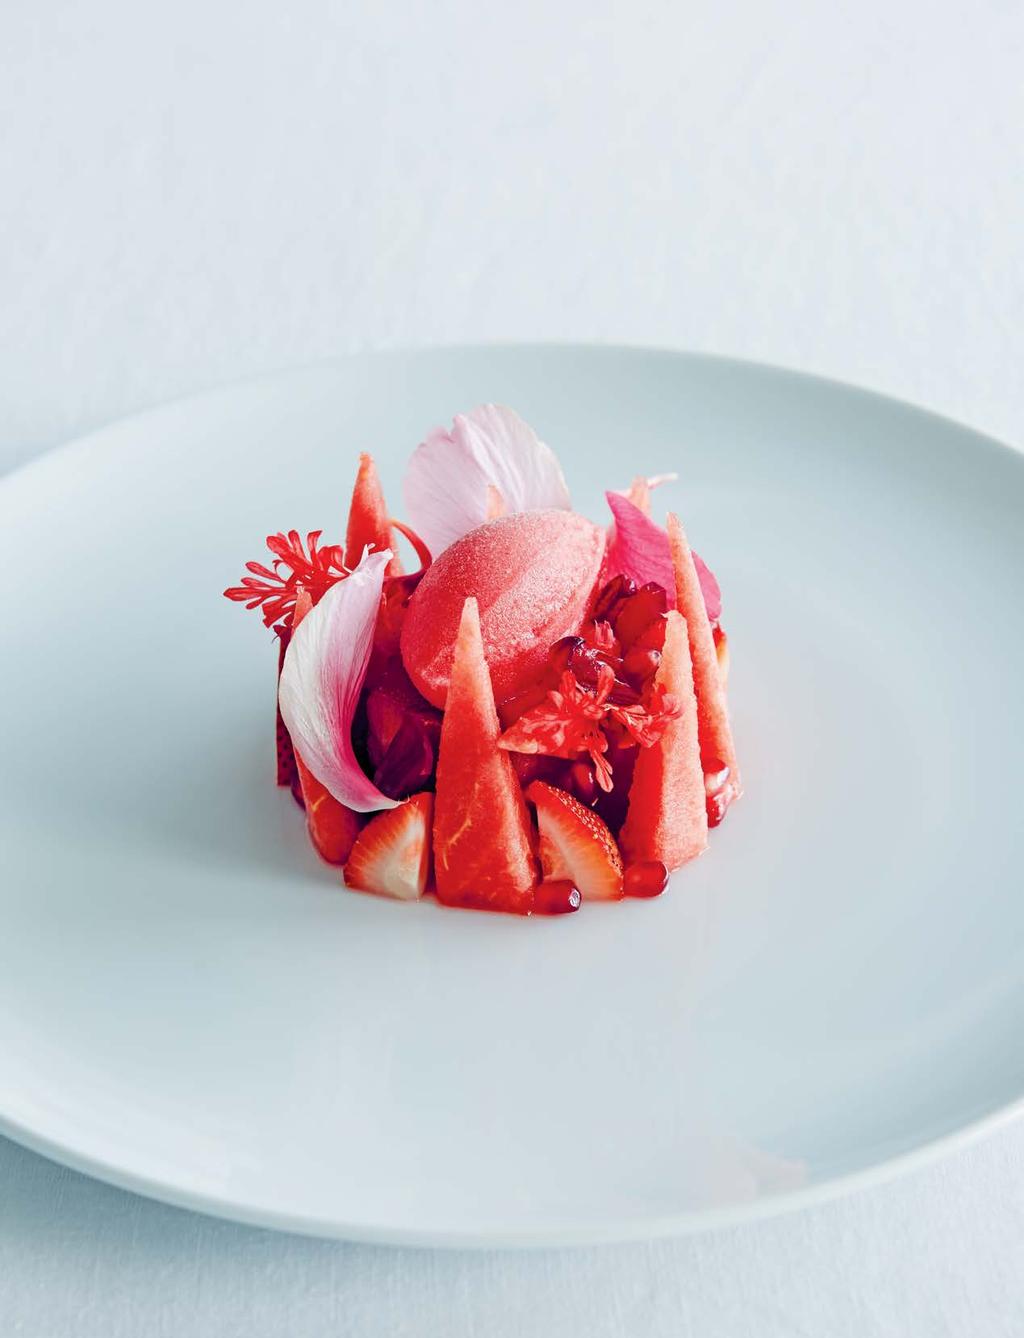 This is a refreshing summery dessert to serve when watermelons are at their peak in colour and sweetness. Hibiscus flowers (also known as rosella) contain even more vitamin C than oranges.